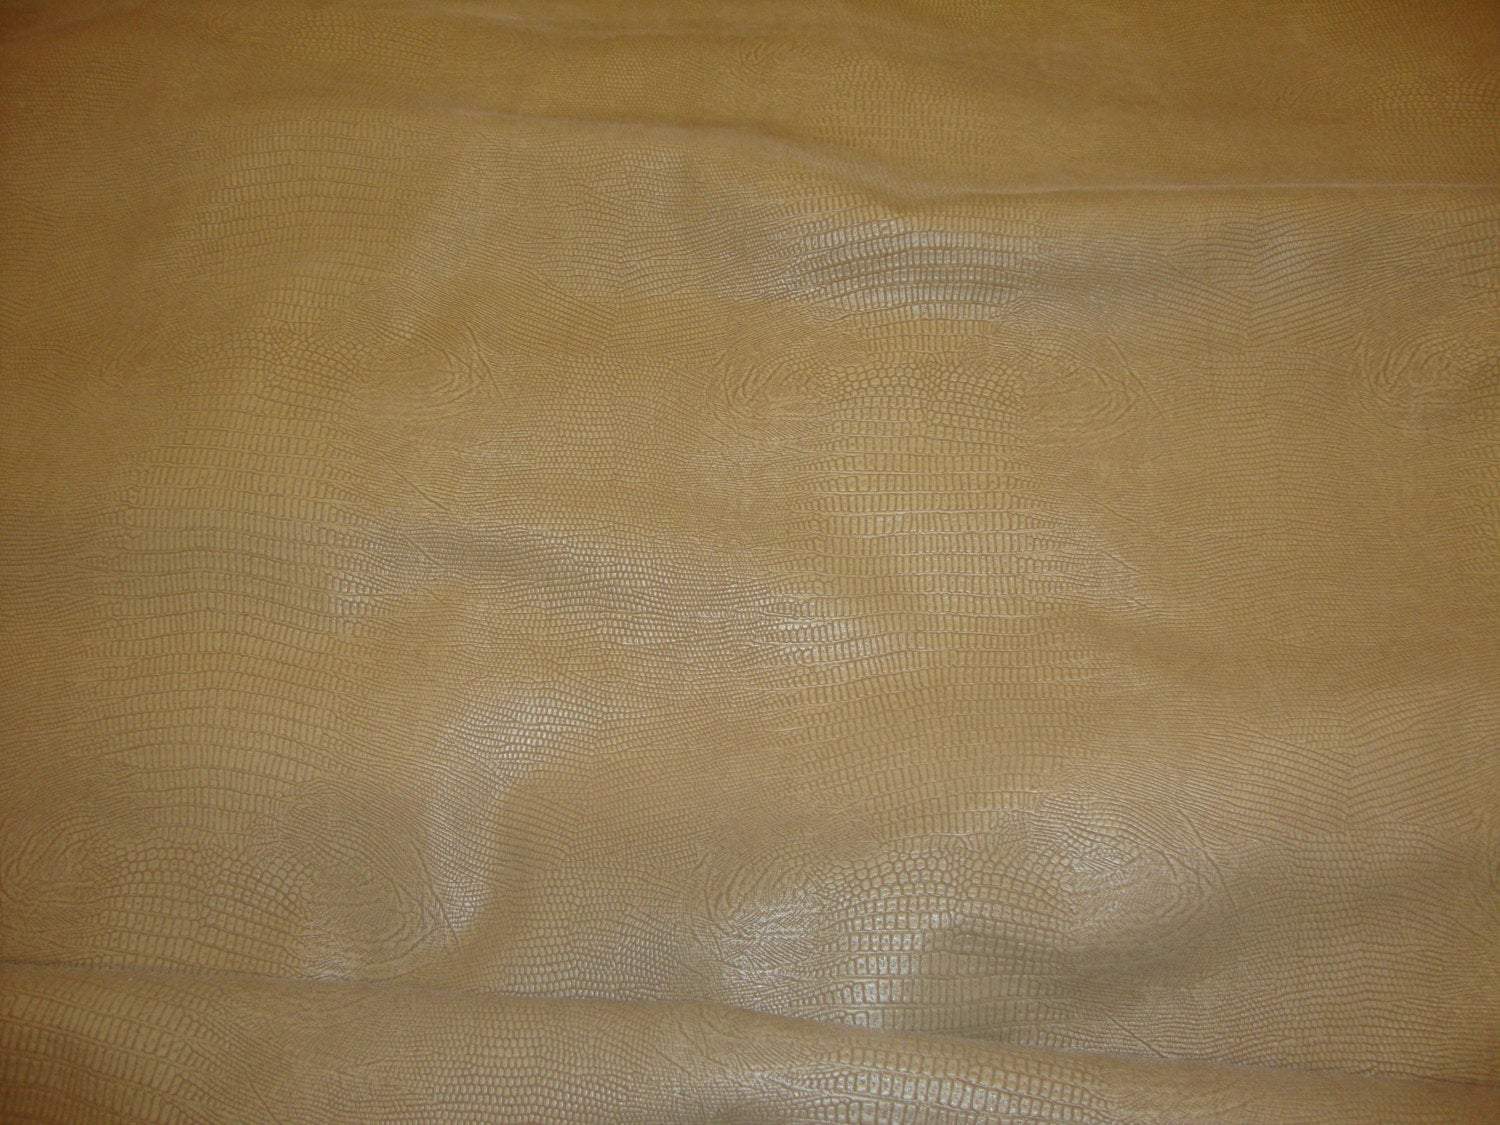 suede-alligator-disressed-faux-leather-vinyl-54-wide-upholstery-fabric-by-the-yard